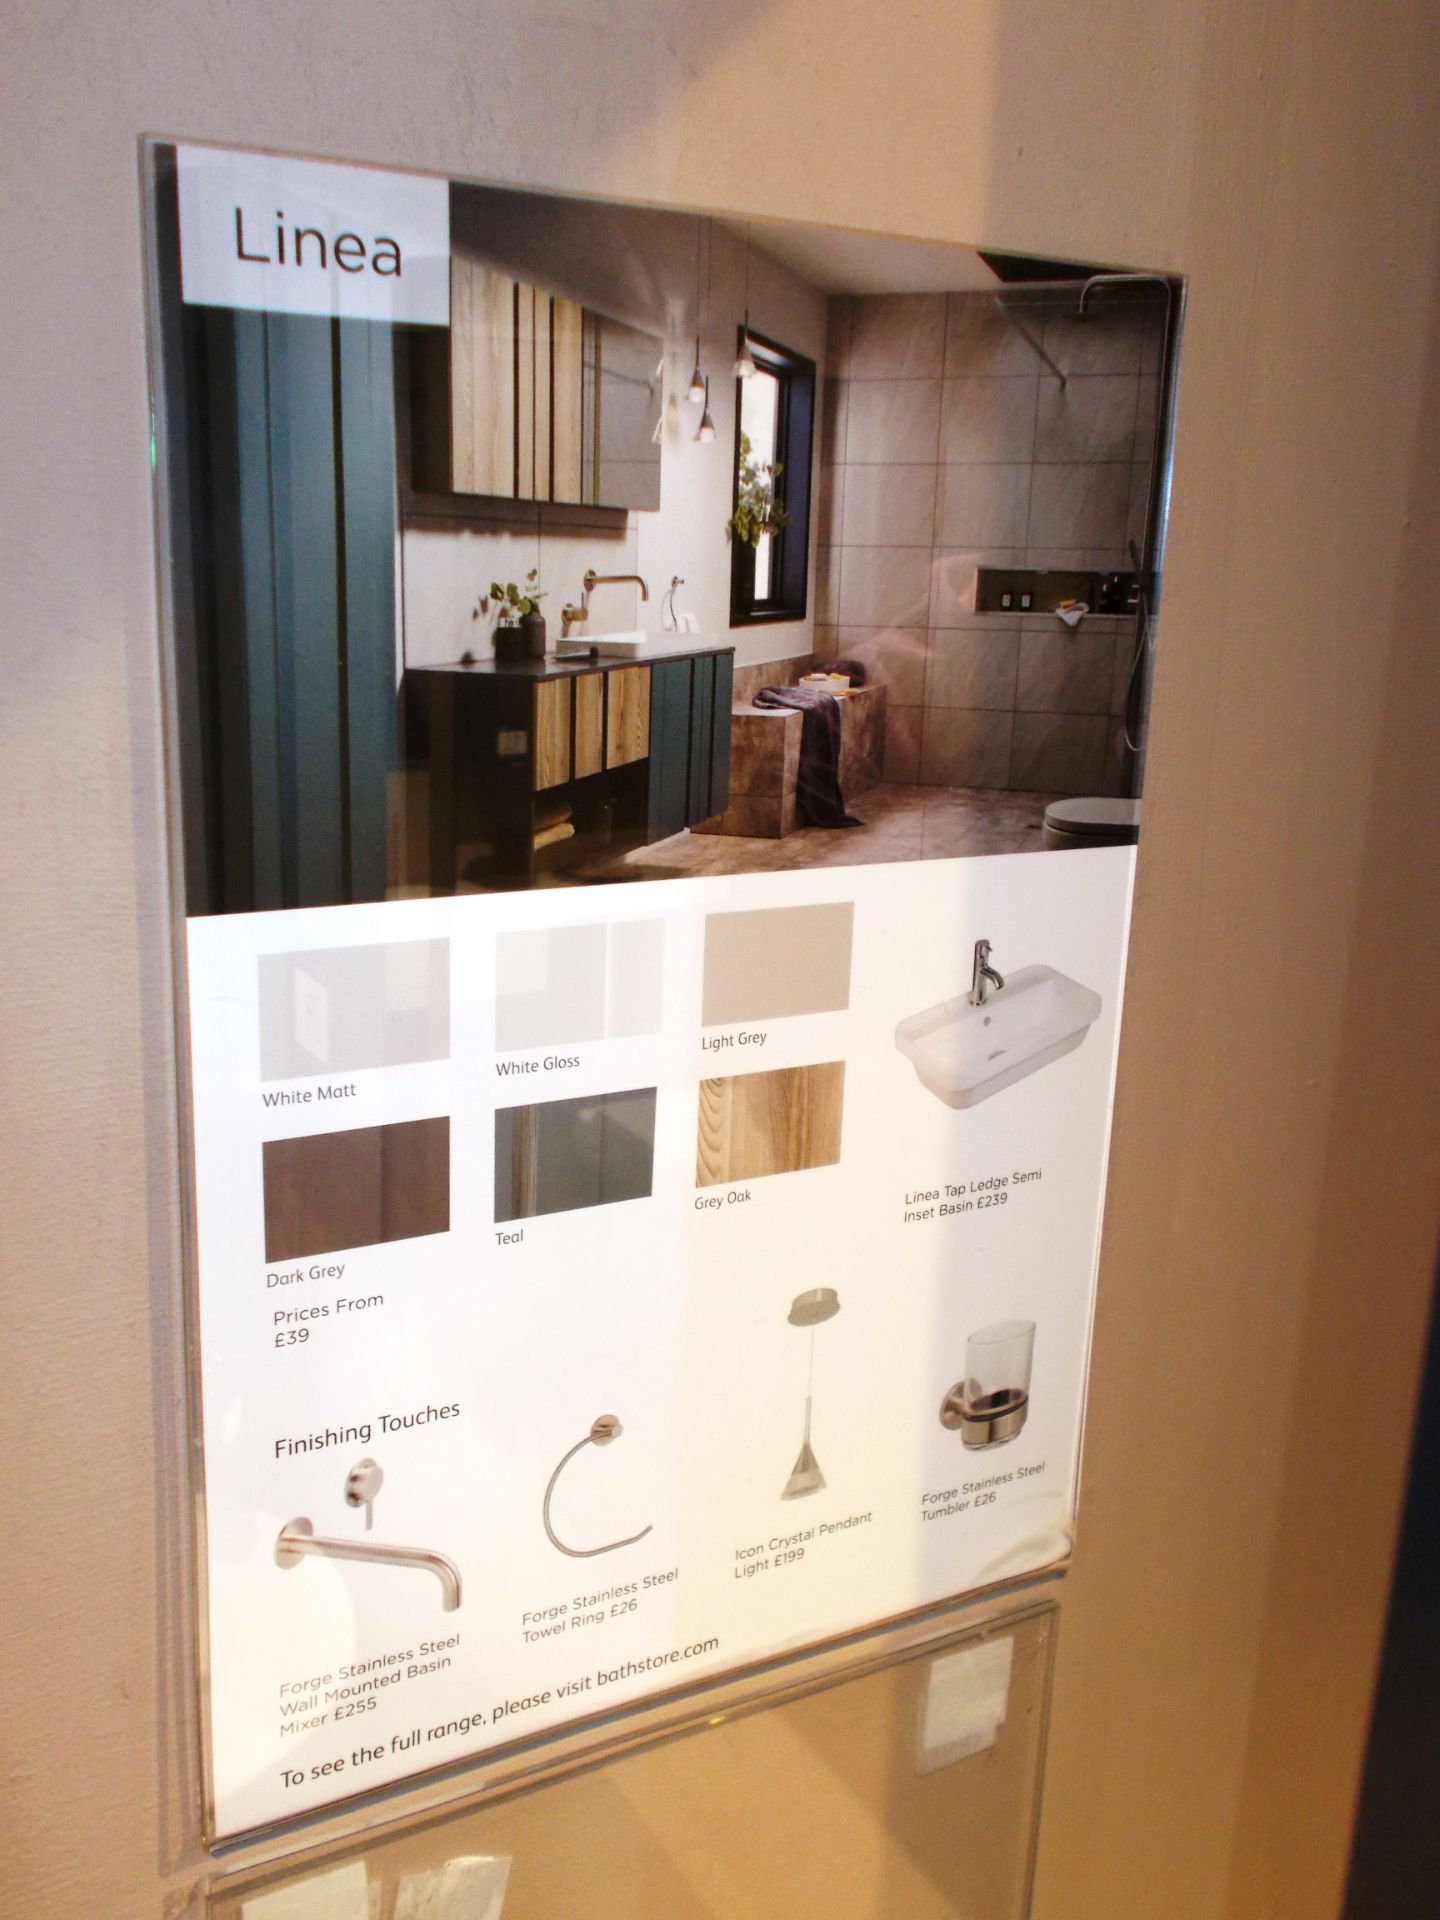 Linea bathroom suite, including cabinets, sink, and toilet. RRP £3,000 - Image 2 of 2